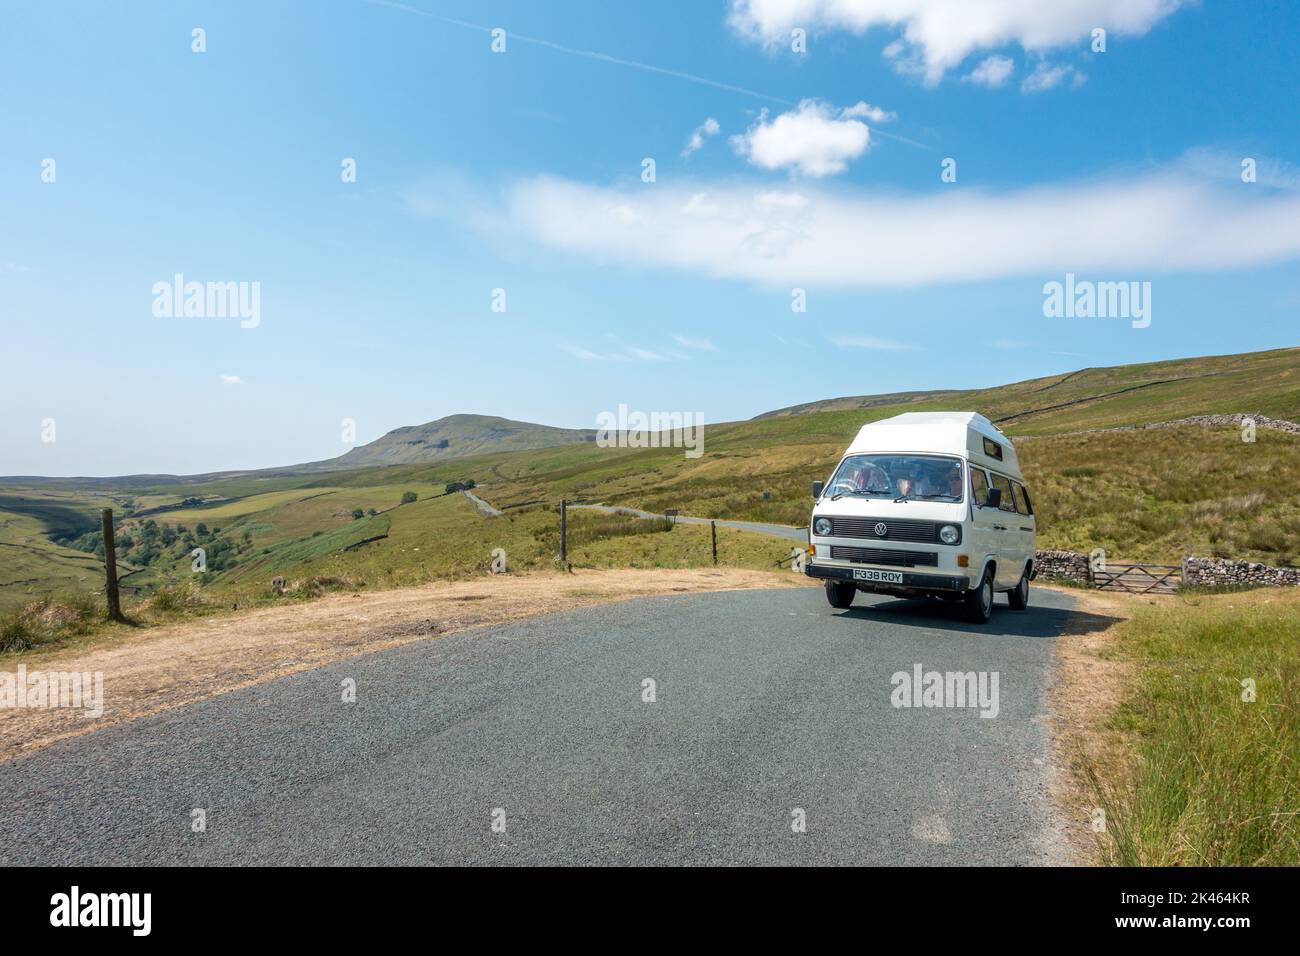 Vintage VW campervan on tour in the Yorkshire Dales with Pen-y-ghent mountain in the background), UK Stock Photo